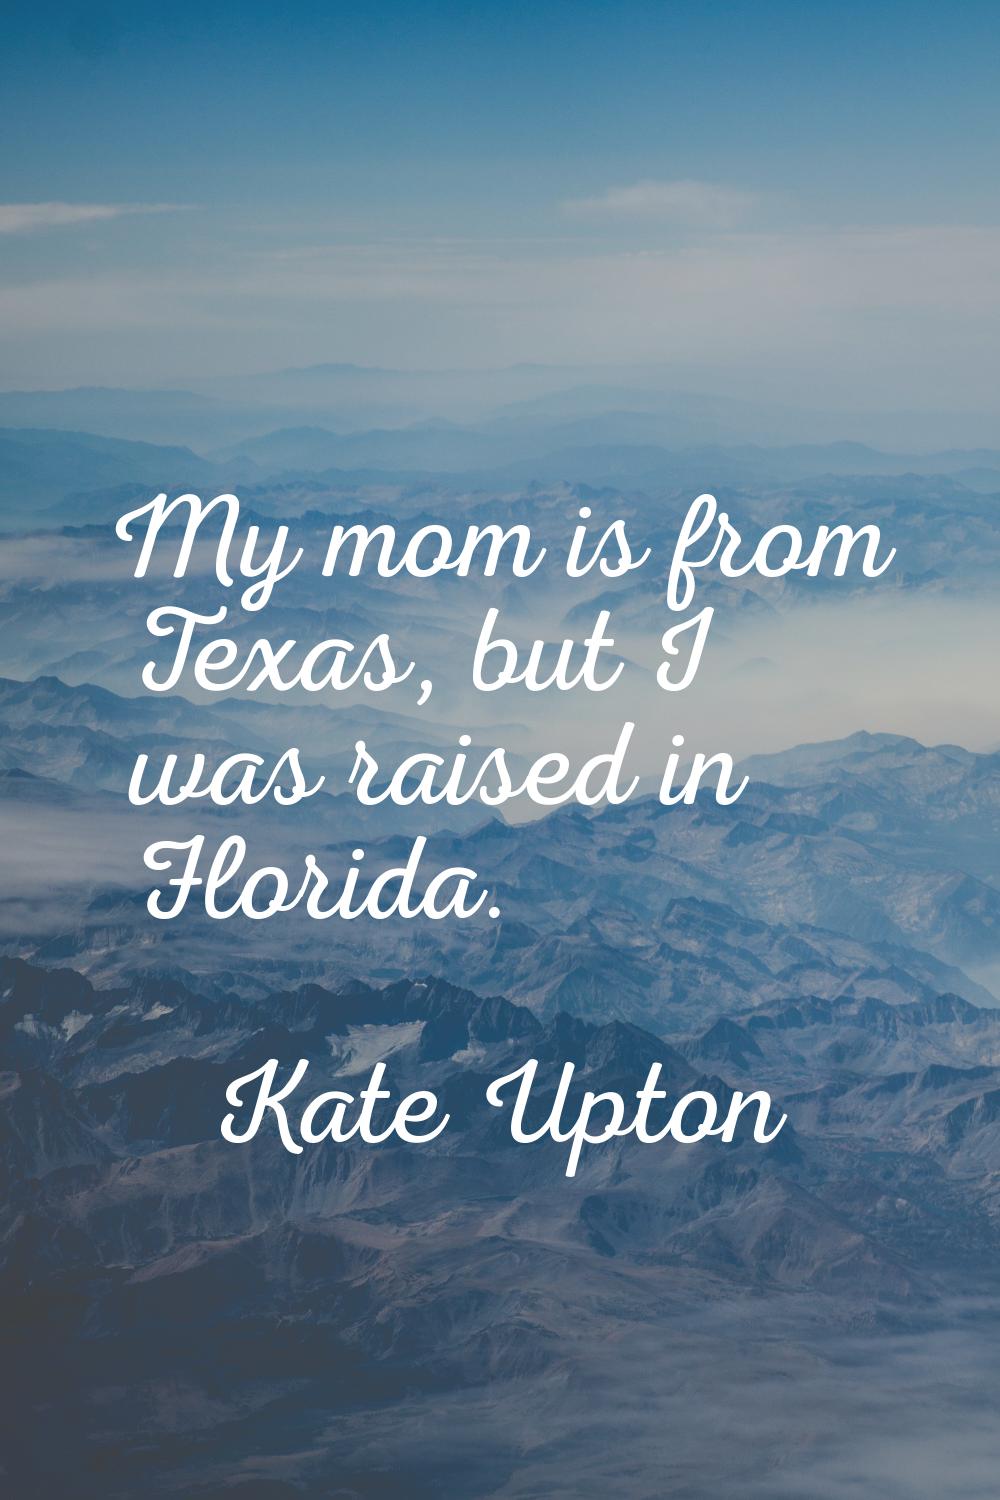 My mom is from Texas, but I was raised in Florida.